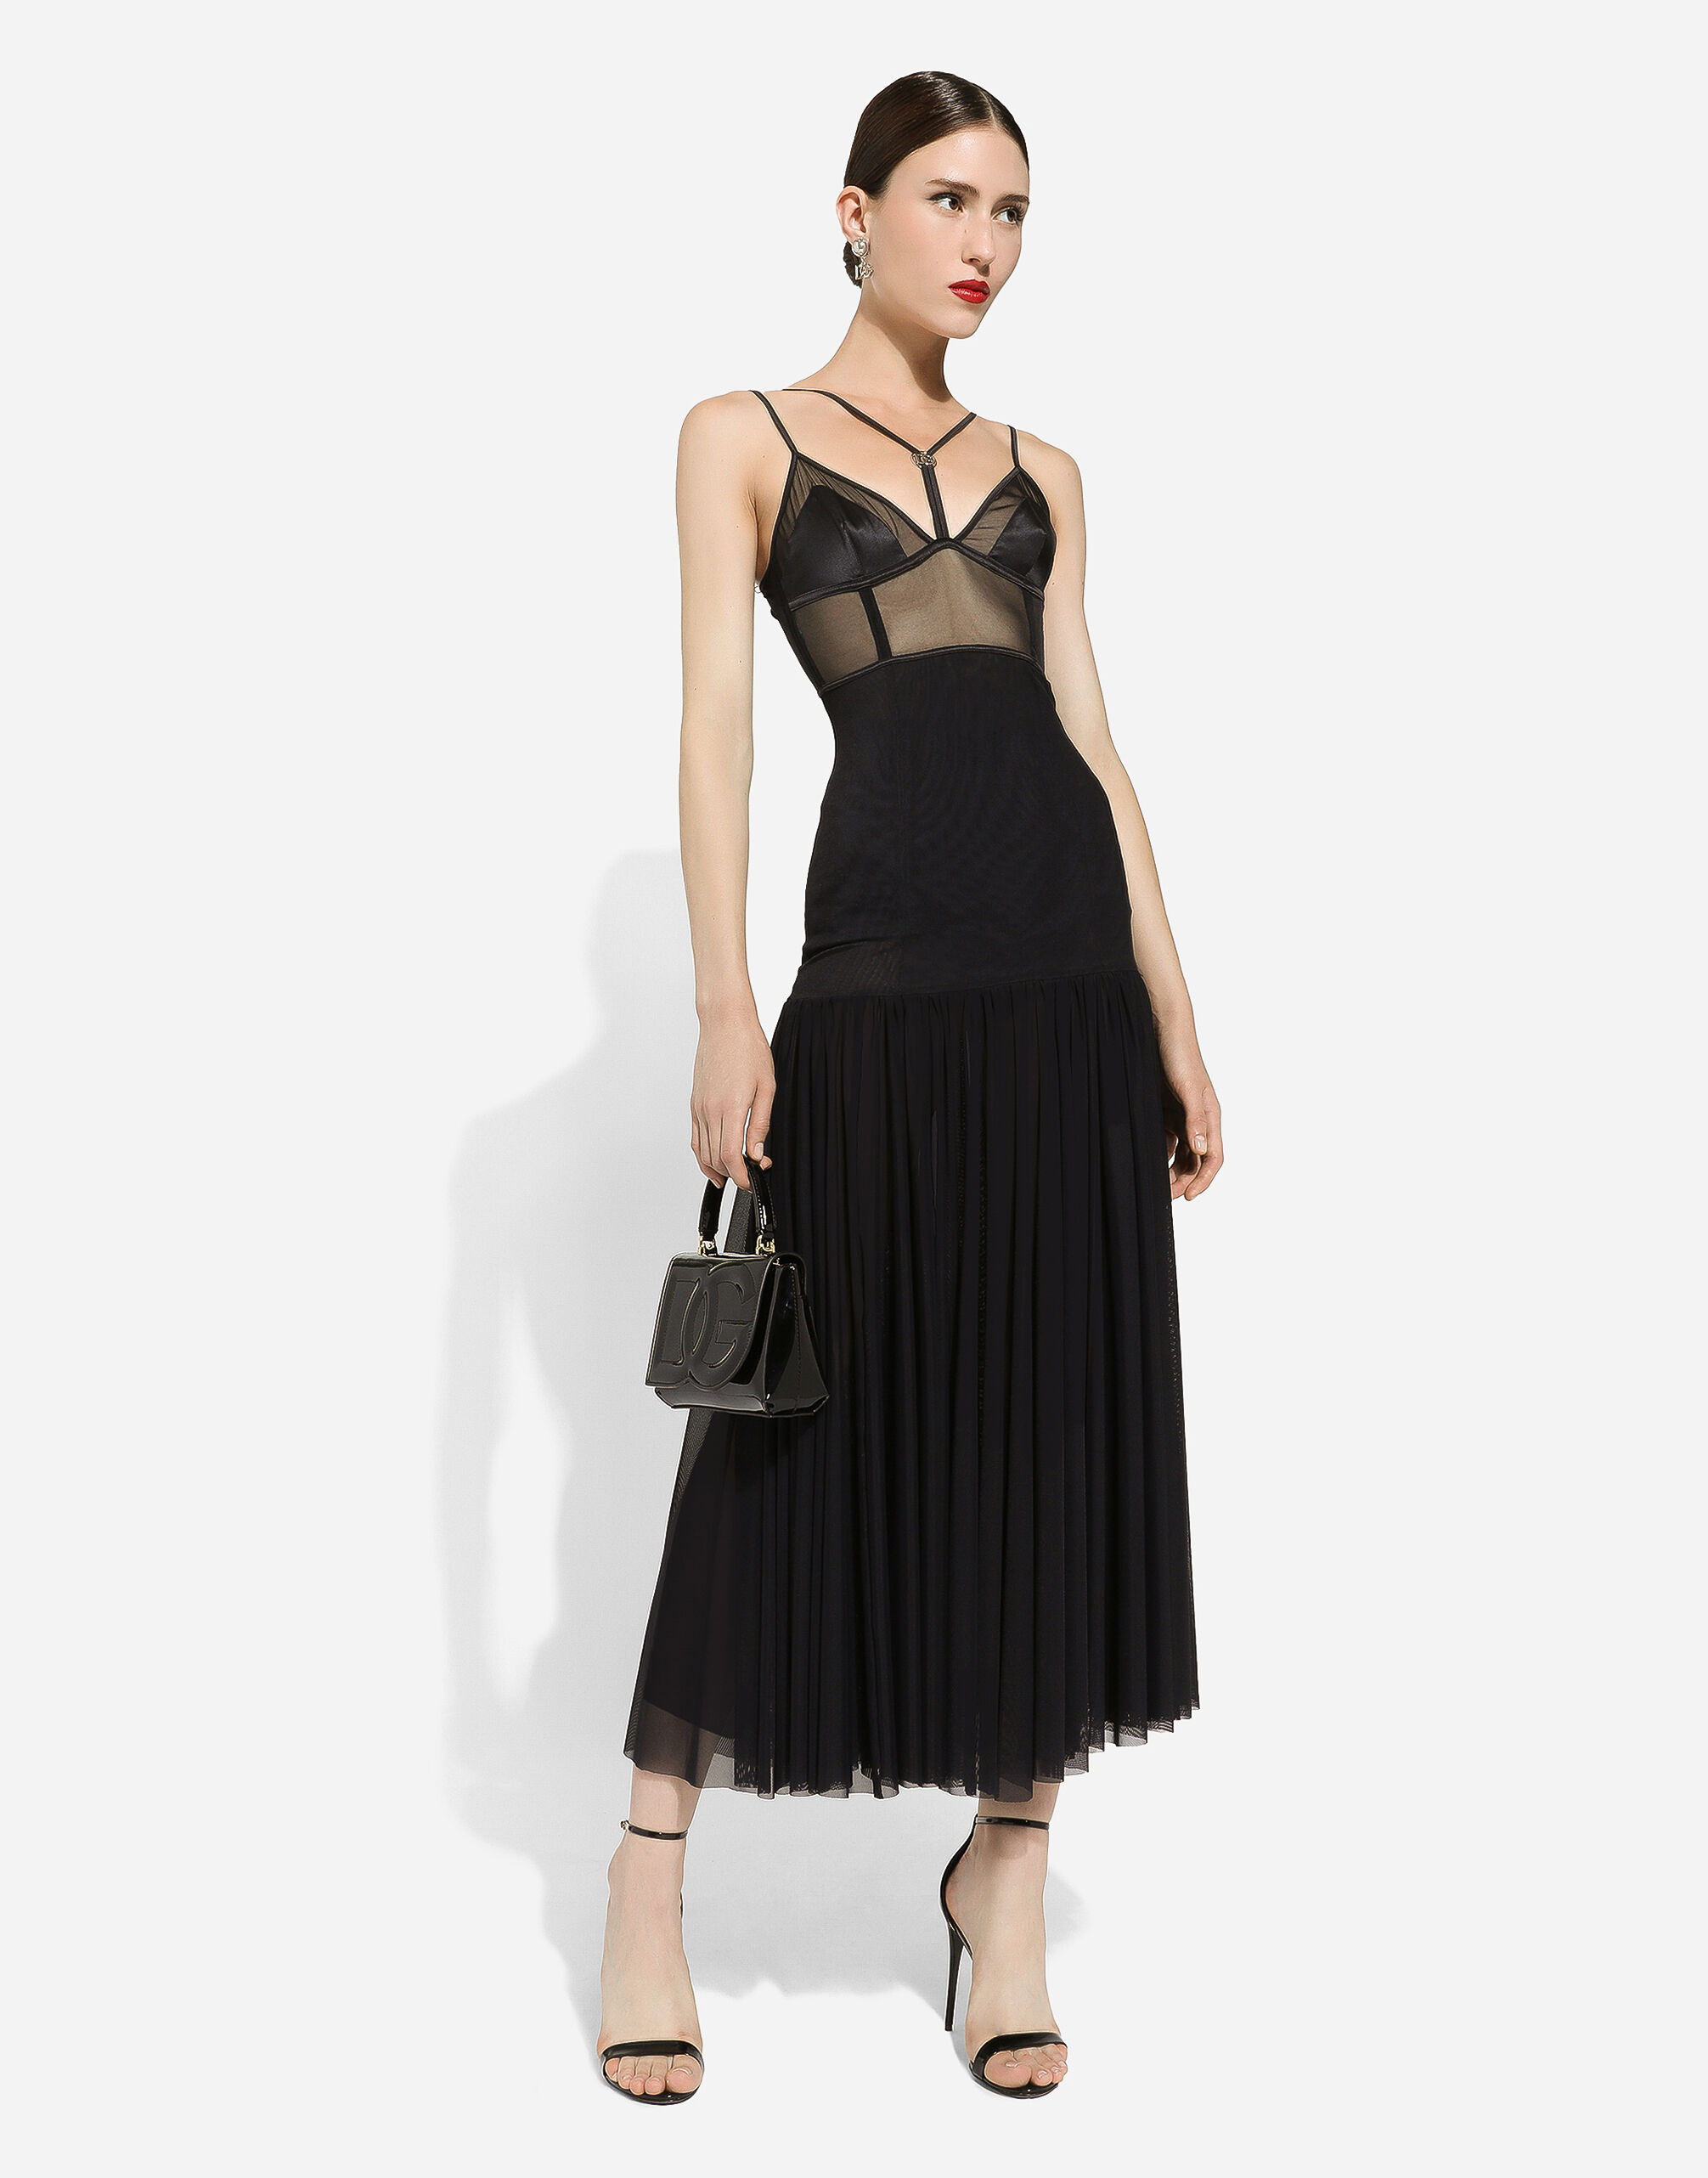 Tulle midi dress with lingerie details and the DG logo